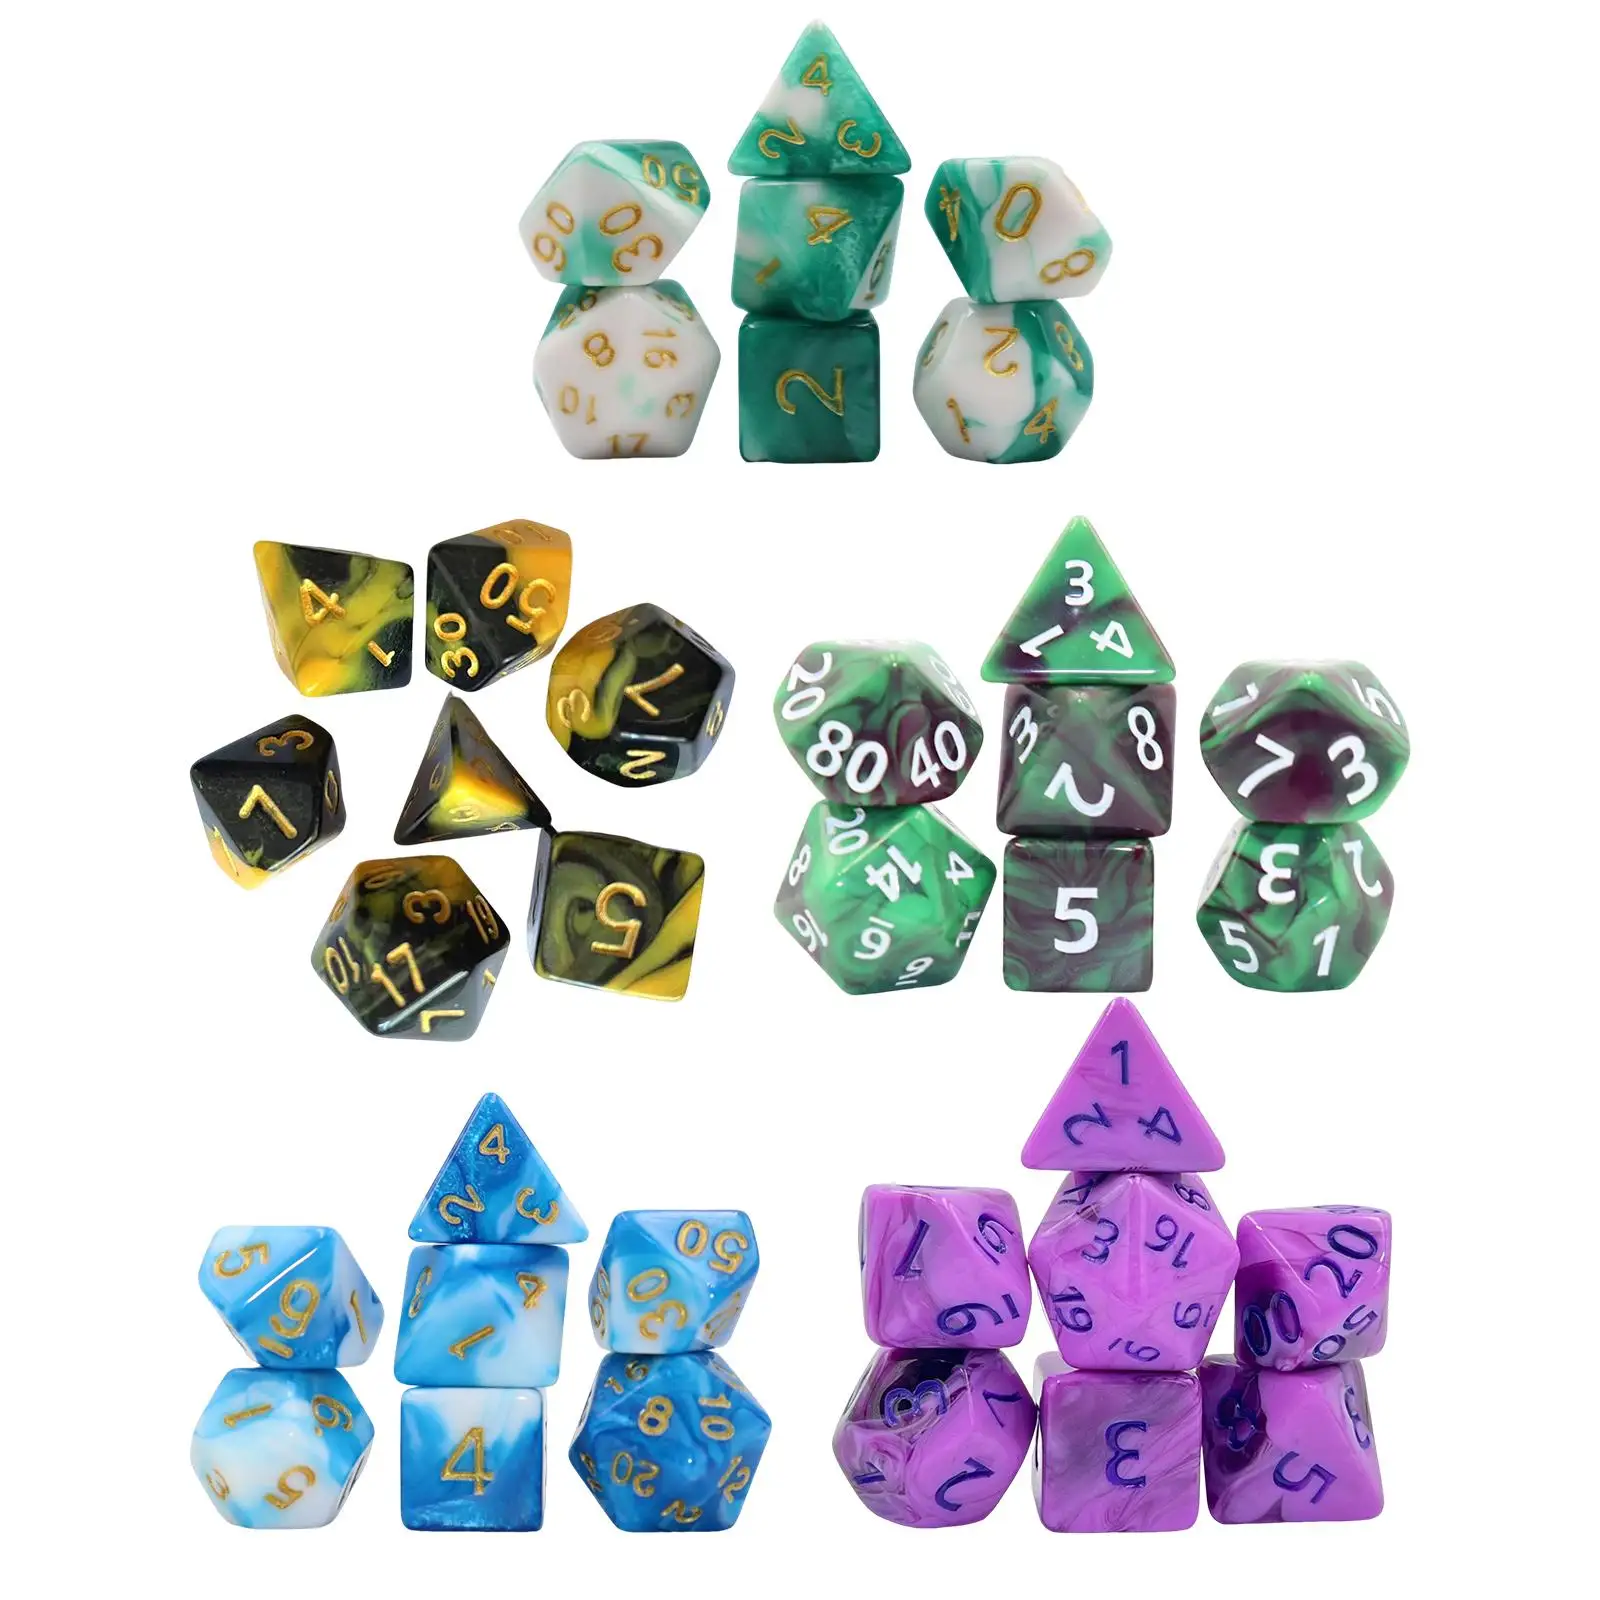 7 Pieces Acrylic Polyhedral Dice Board Games, Multi-Sided Dice, Gaming Dice for